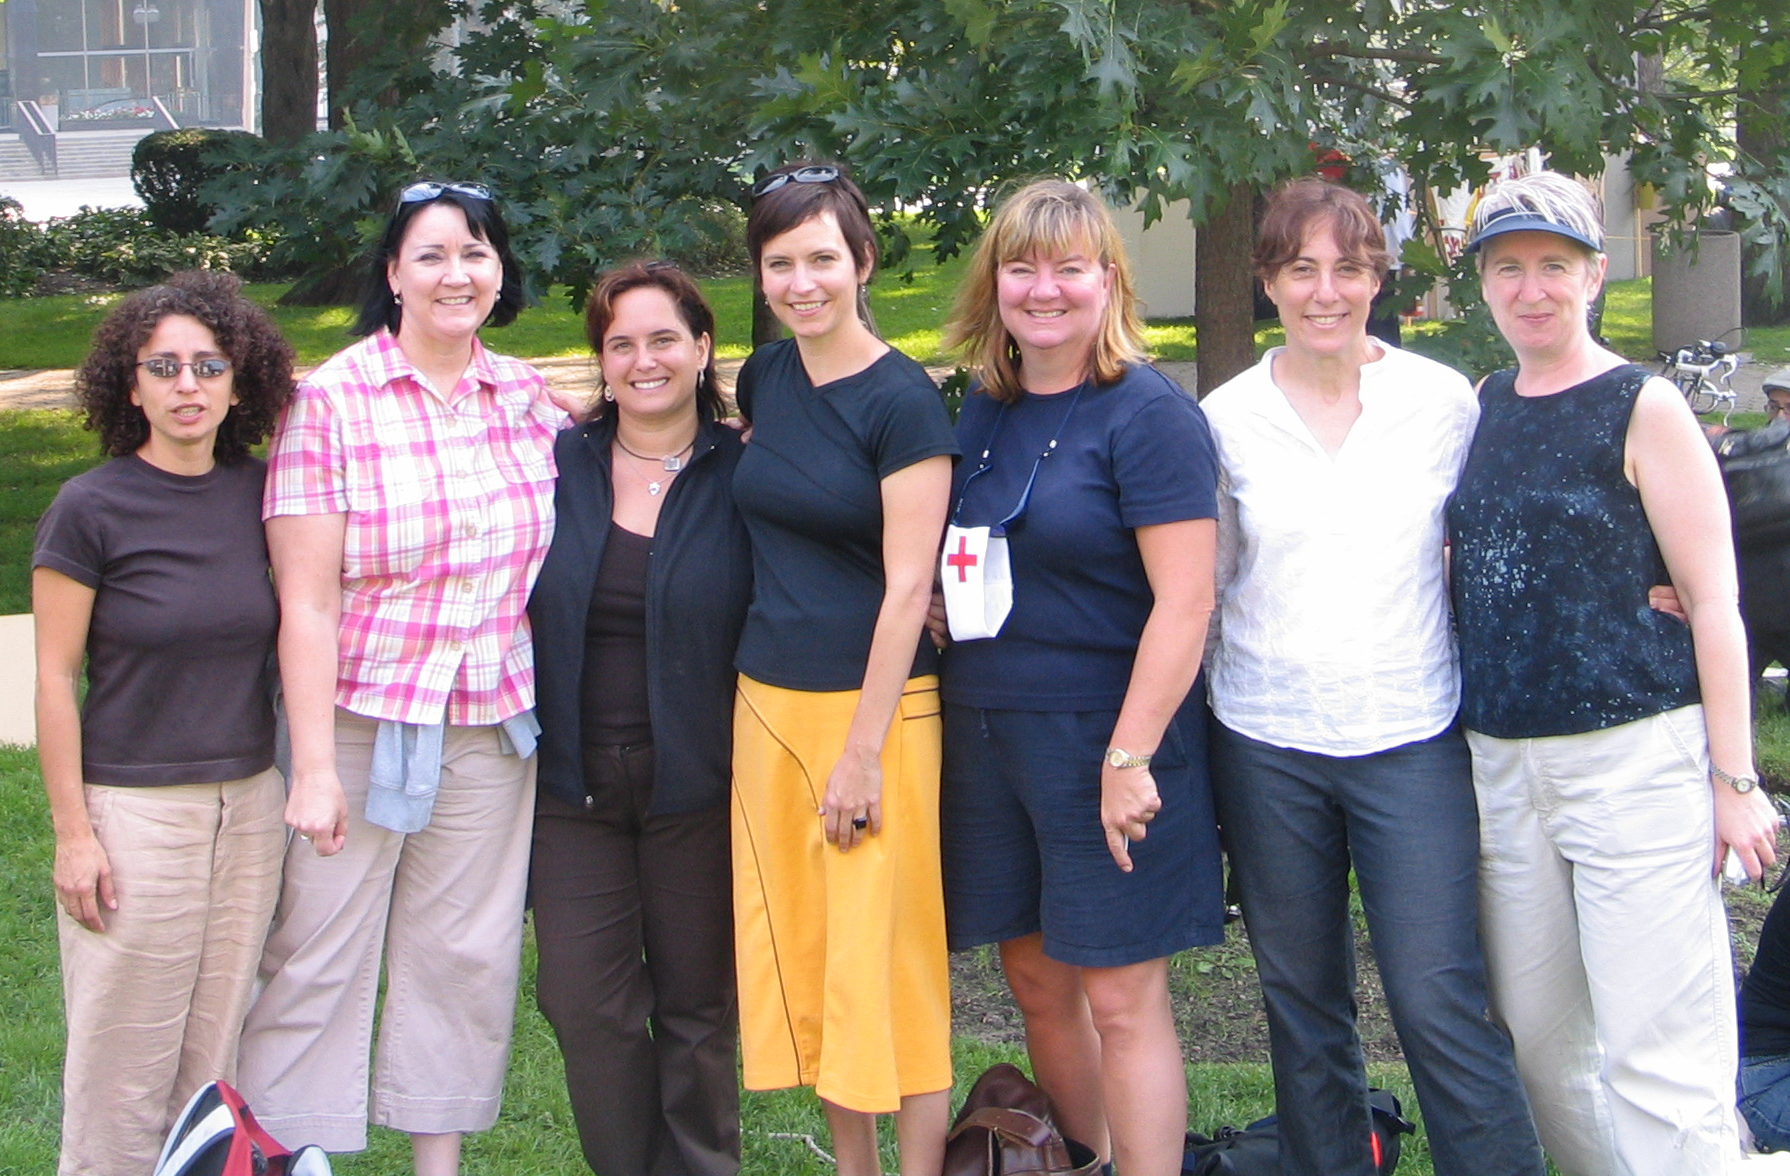 Miriam Garfinkle and other health care providers from Regent Park CHC. Photo by Ulli Diemer.